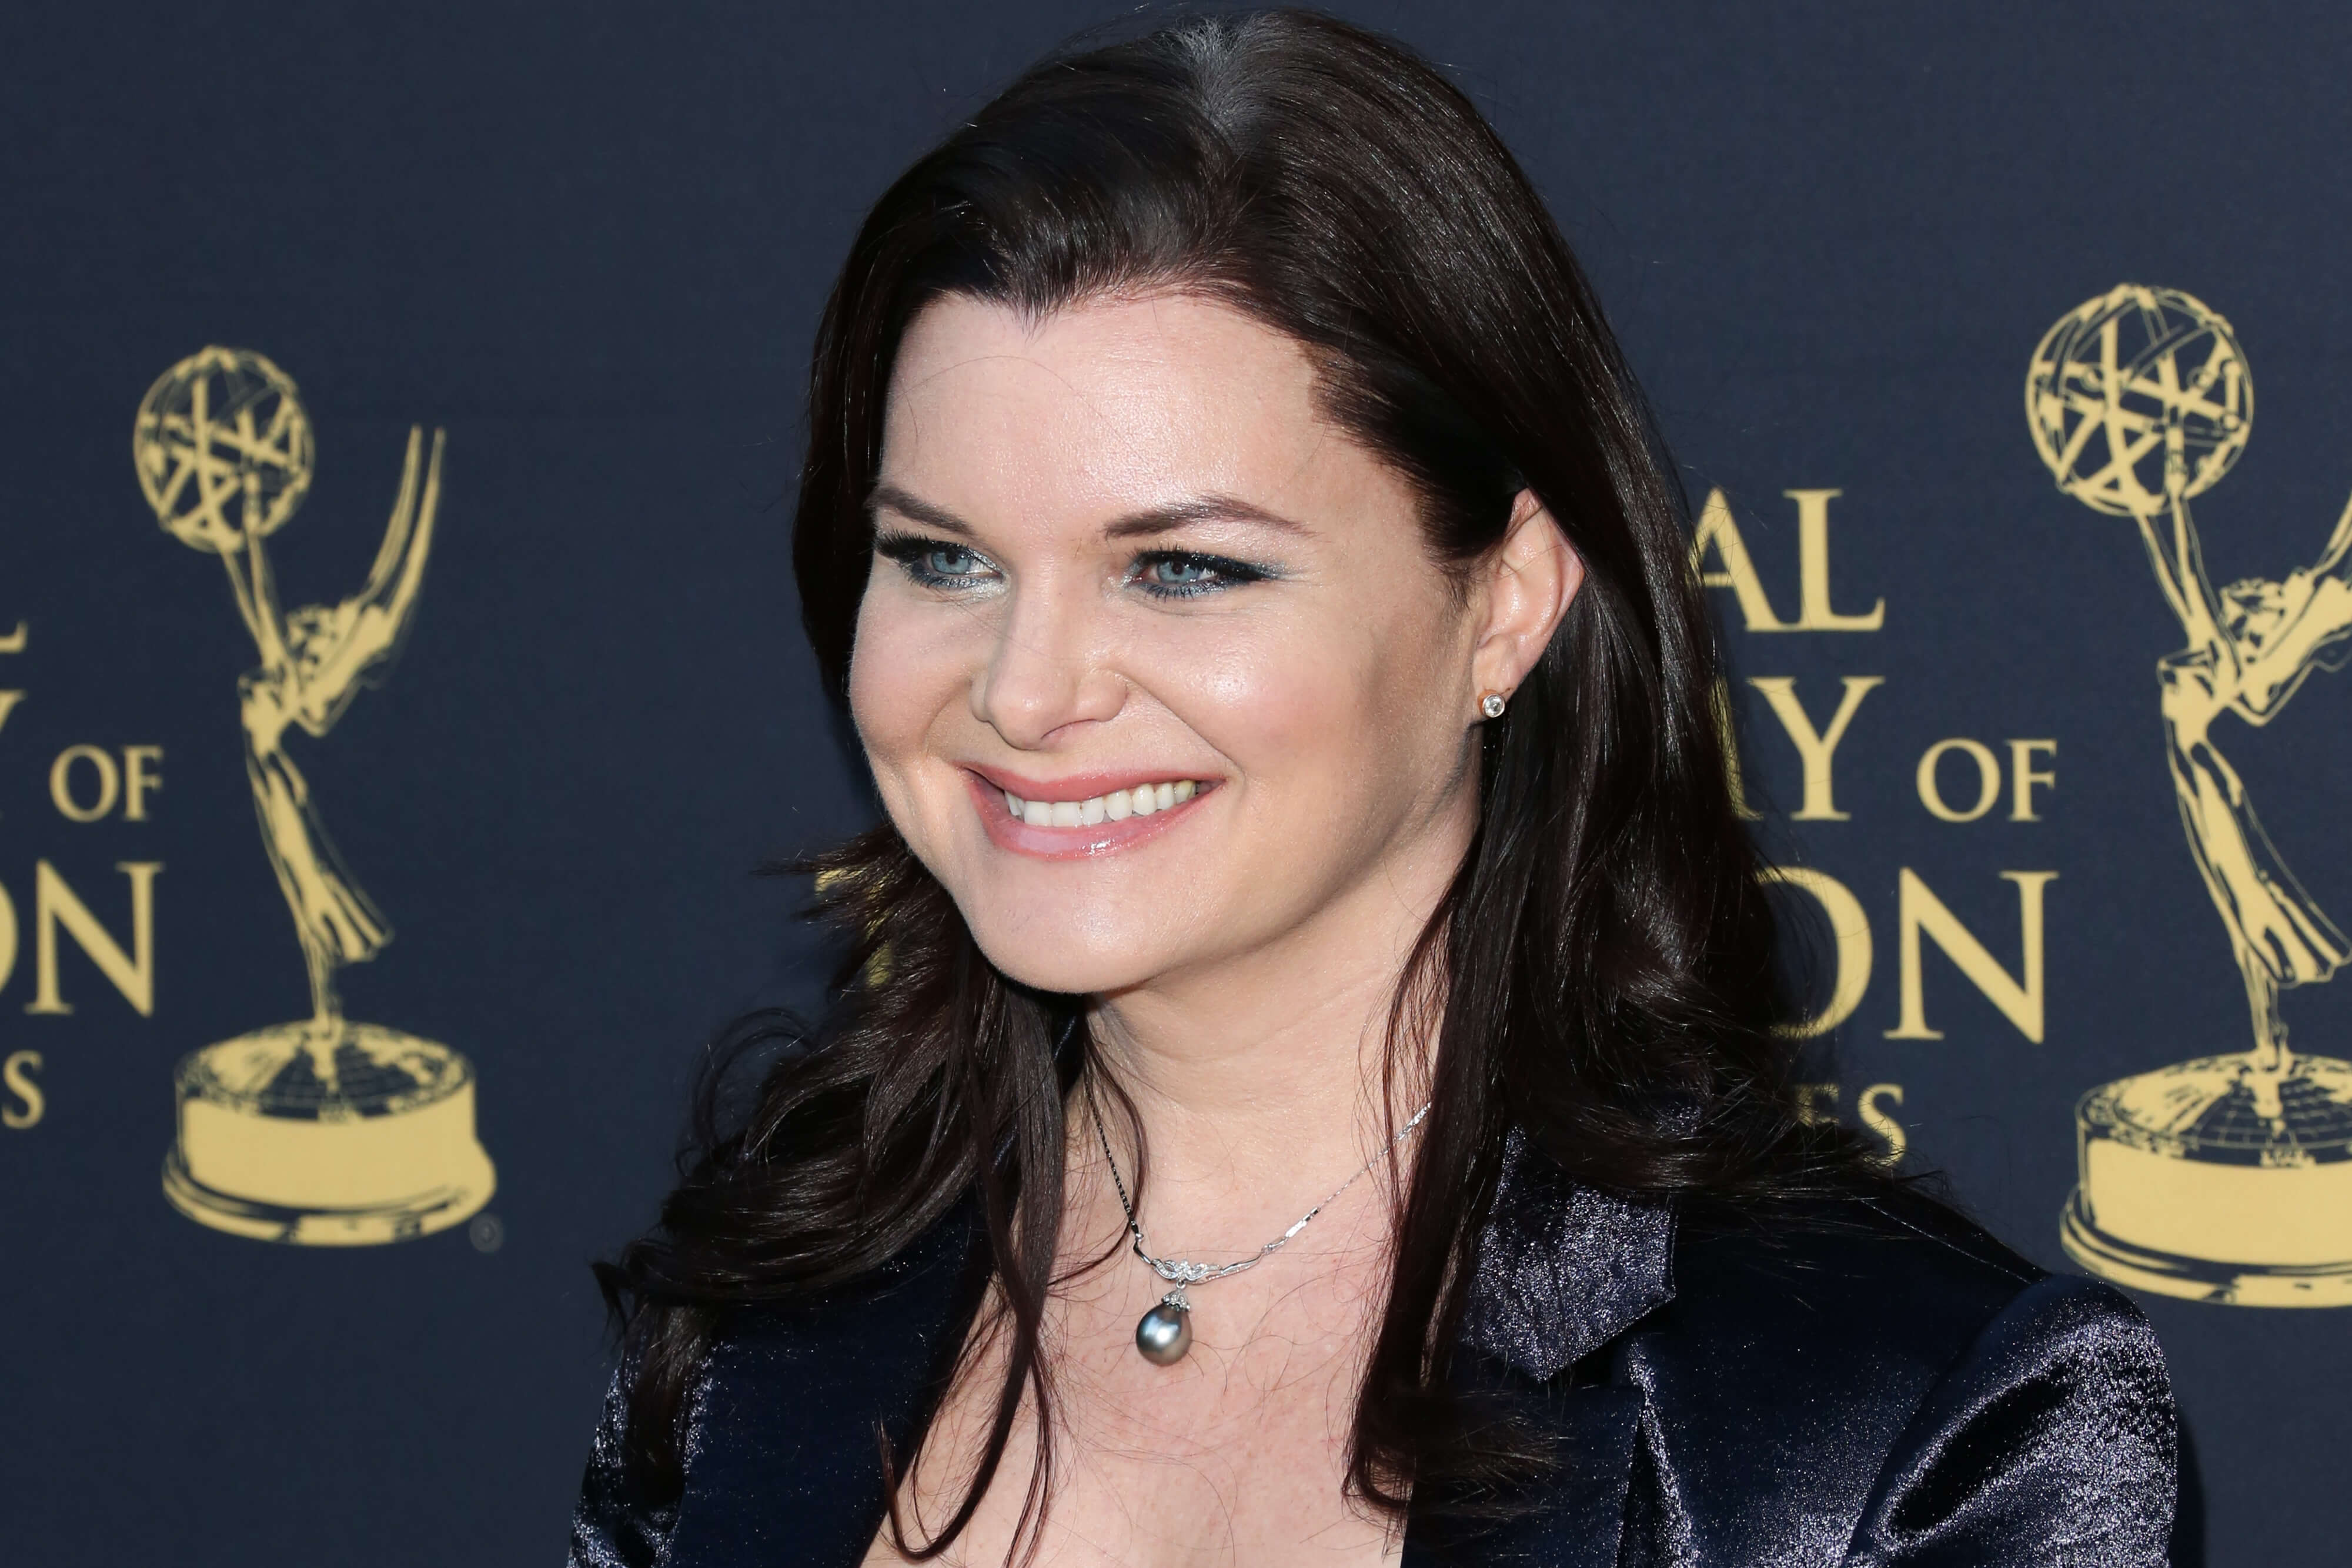 'The Bold and the Beautiful' star Heather Tom dressed in a black pantsuit; smiling for a red carpet photo.